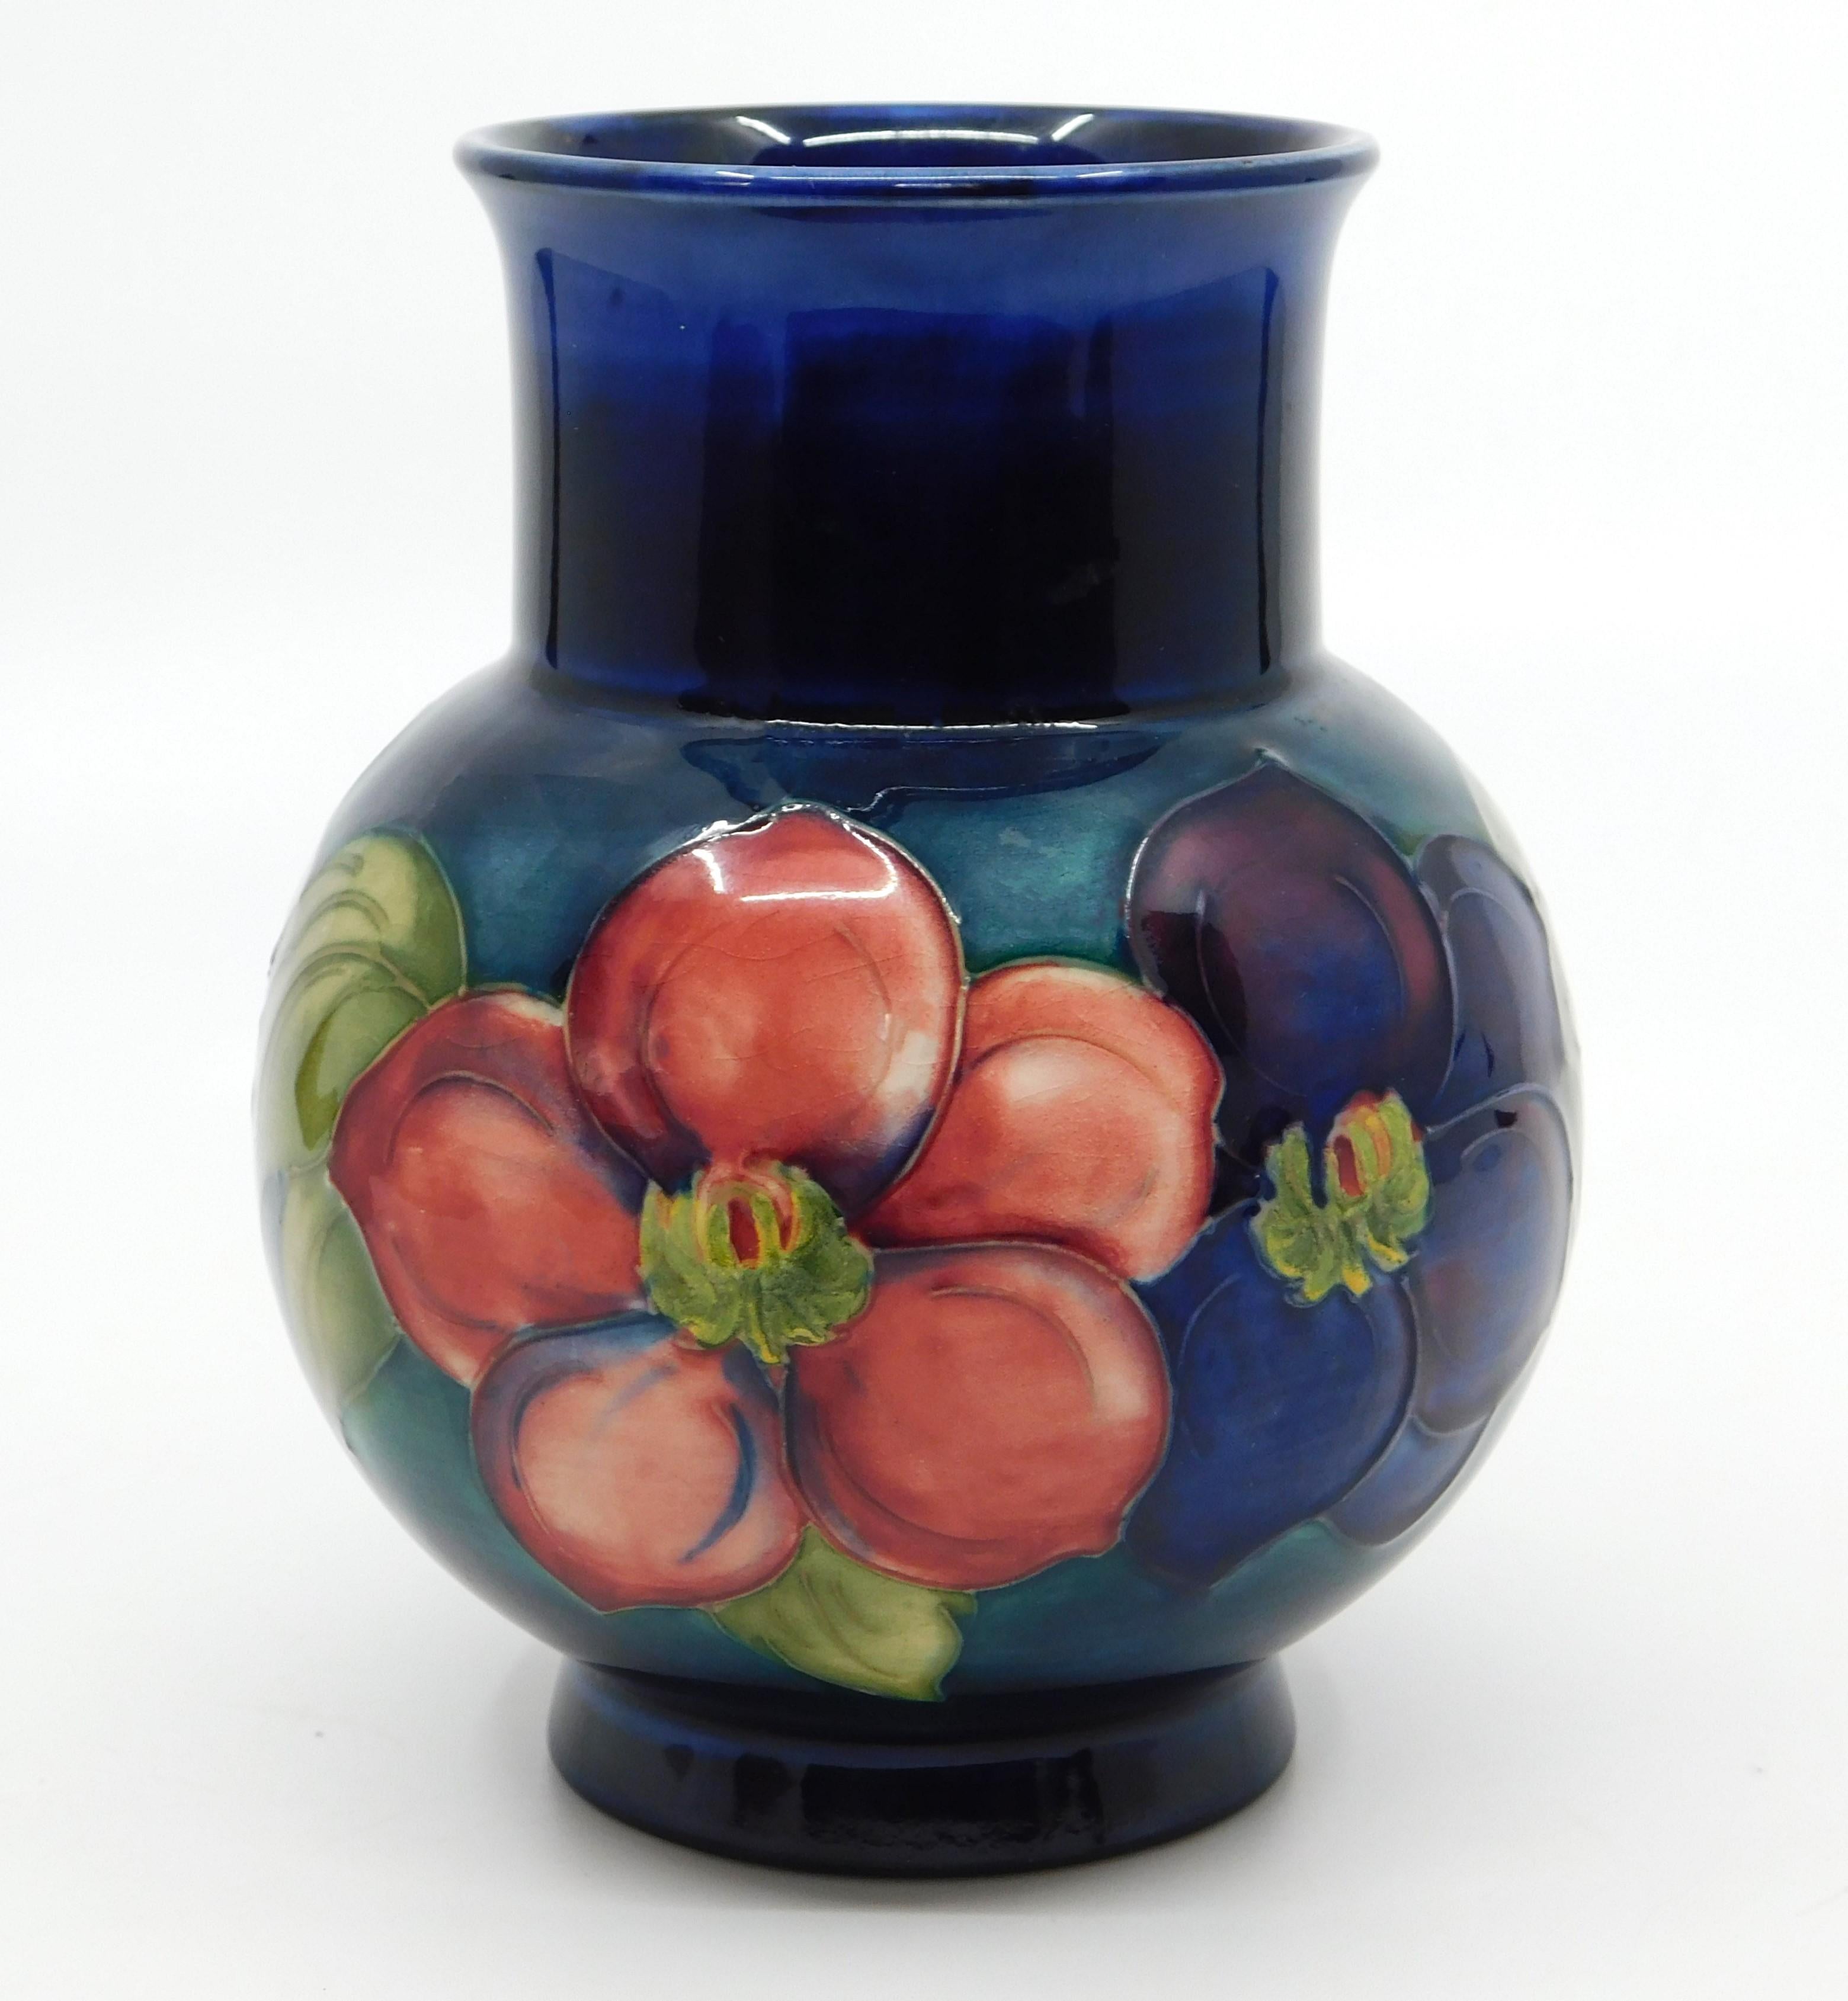 This beautiful art pottery vase was done by the Moorcroft Pottery company of England in circa 1940 using their signature deep cobalt blue ground and done in the 'Clematis' pattern.
Designed and produced by William Moorcroft It features fine tube